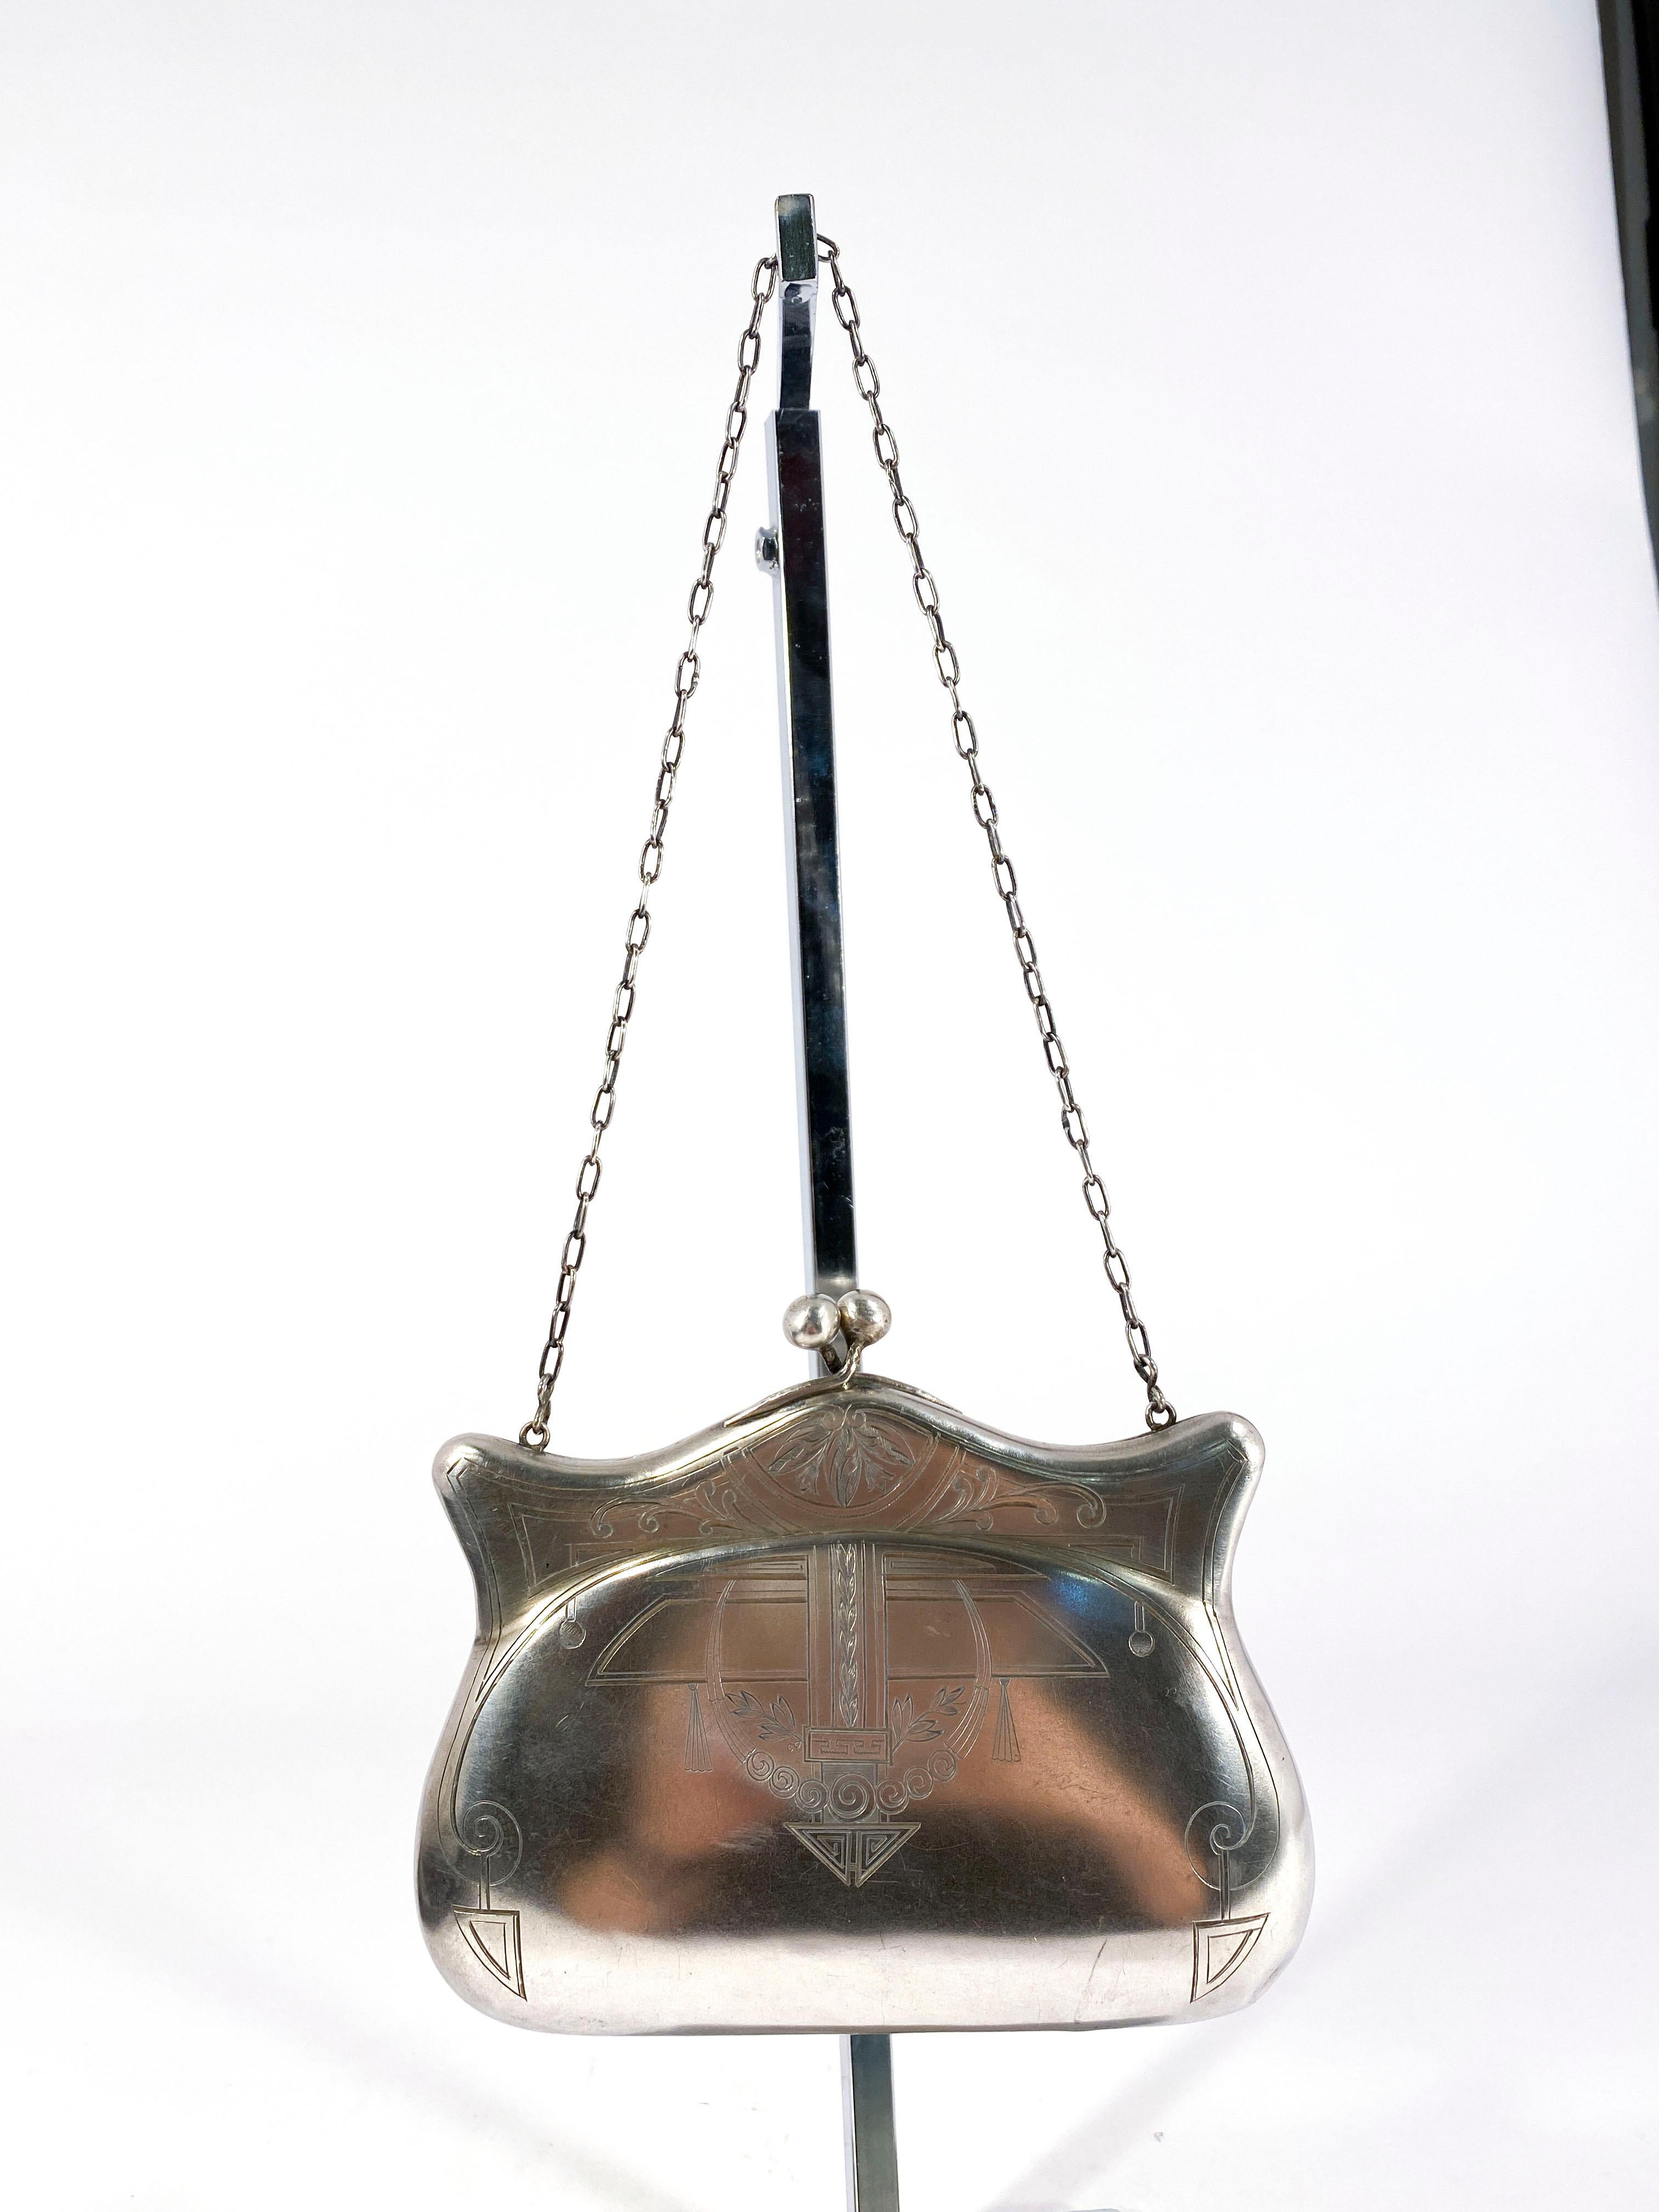 Edwardian Russian silver Art Nouveau hand etched evening purse. The intricate etching is all hand-done along the top and down the sides of the front part of the purse. The lining is missing but not necessary while worn. The handle is an extra long